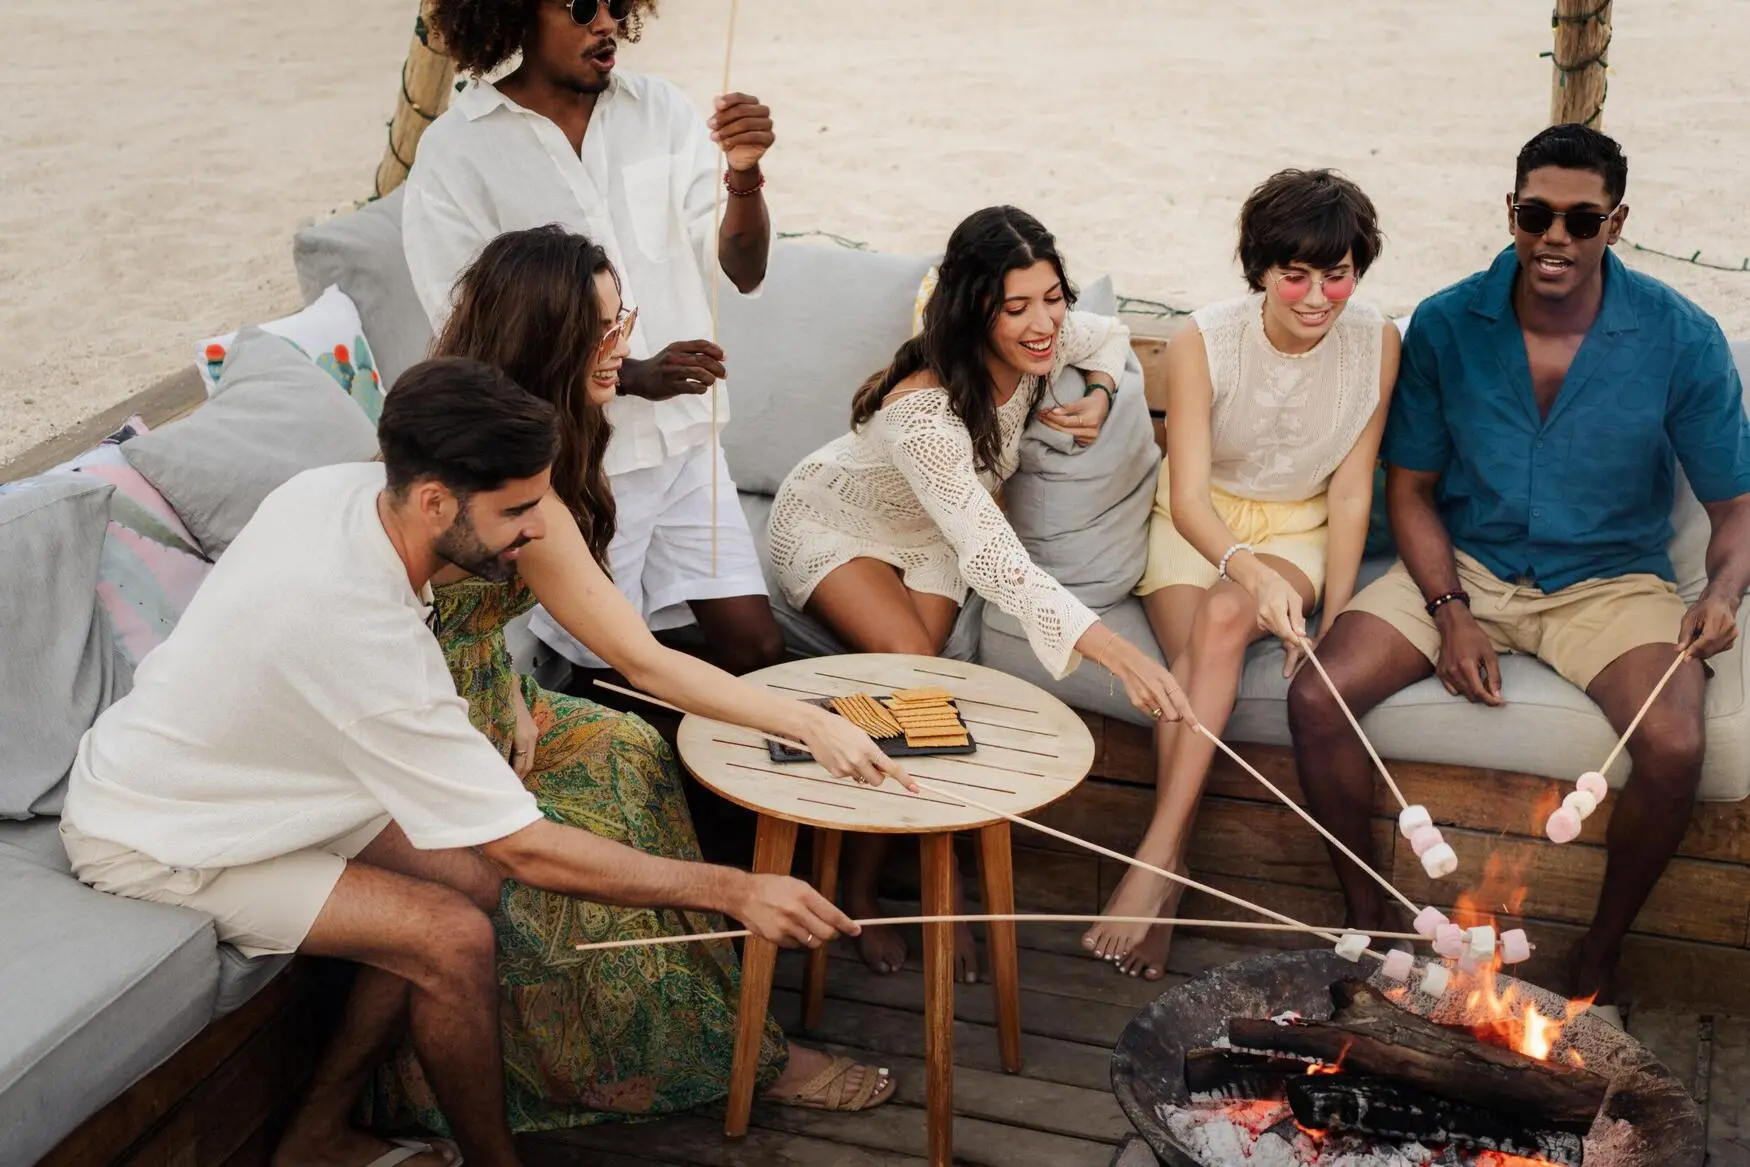 picture of guests in a cafe on beach burning marshmallows